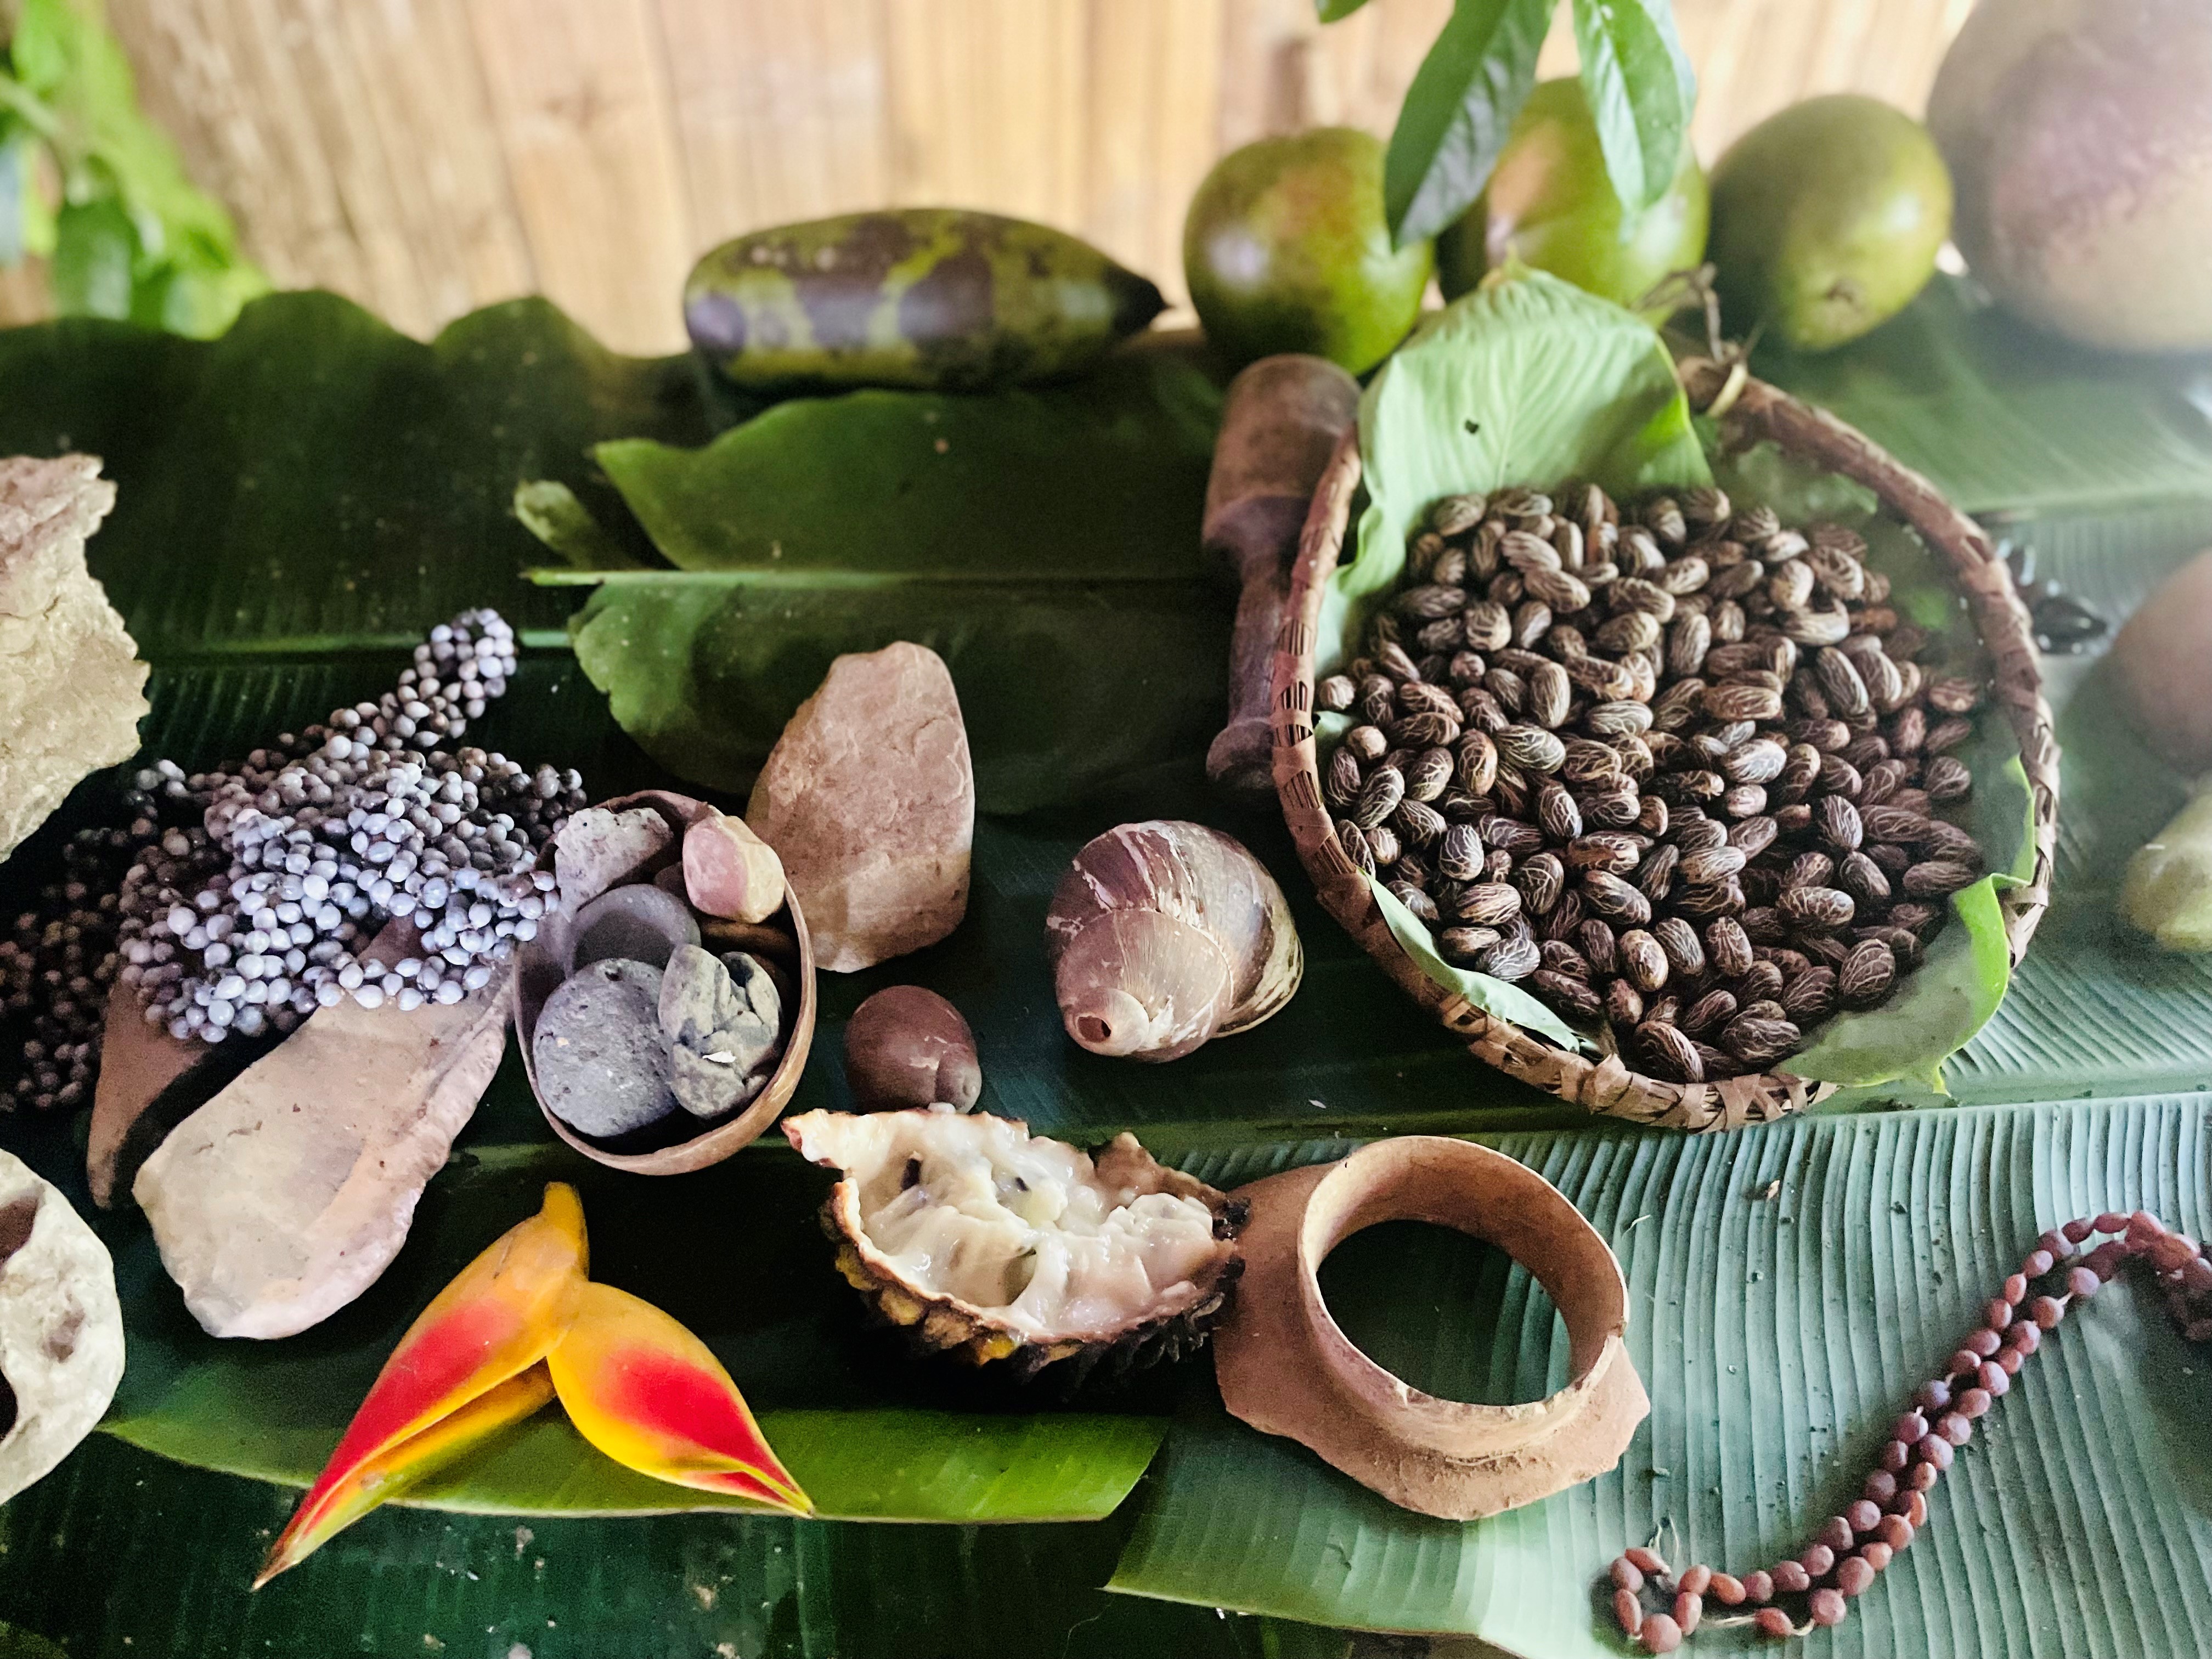 Seeds, fruits, and flowers laid out on banana leaves.